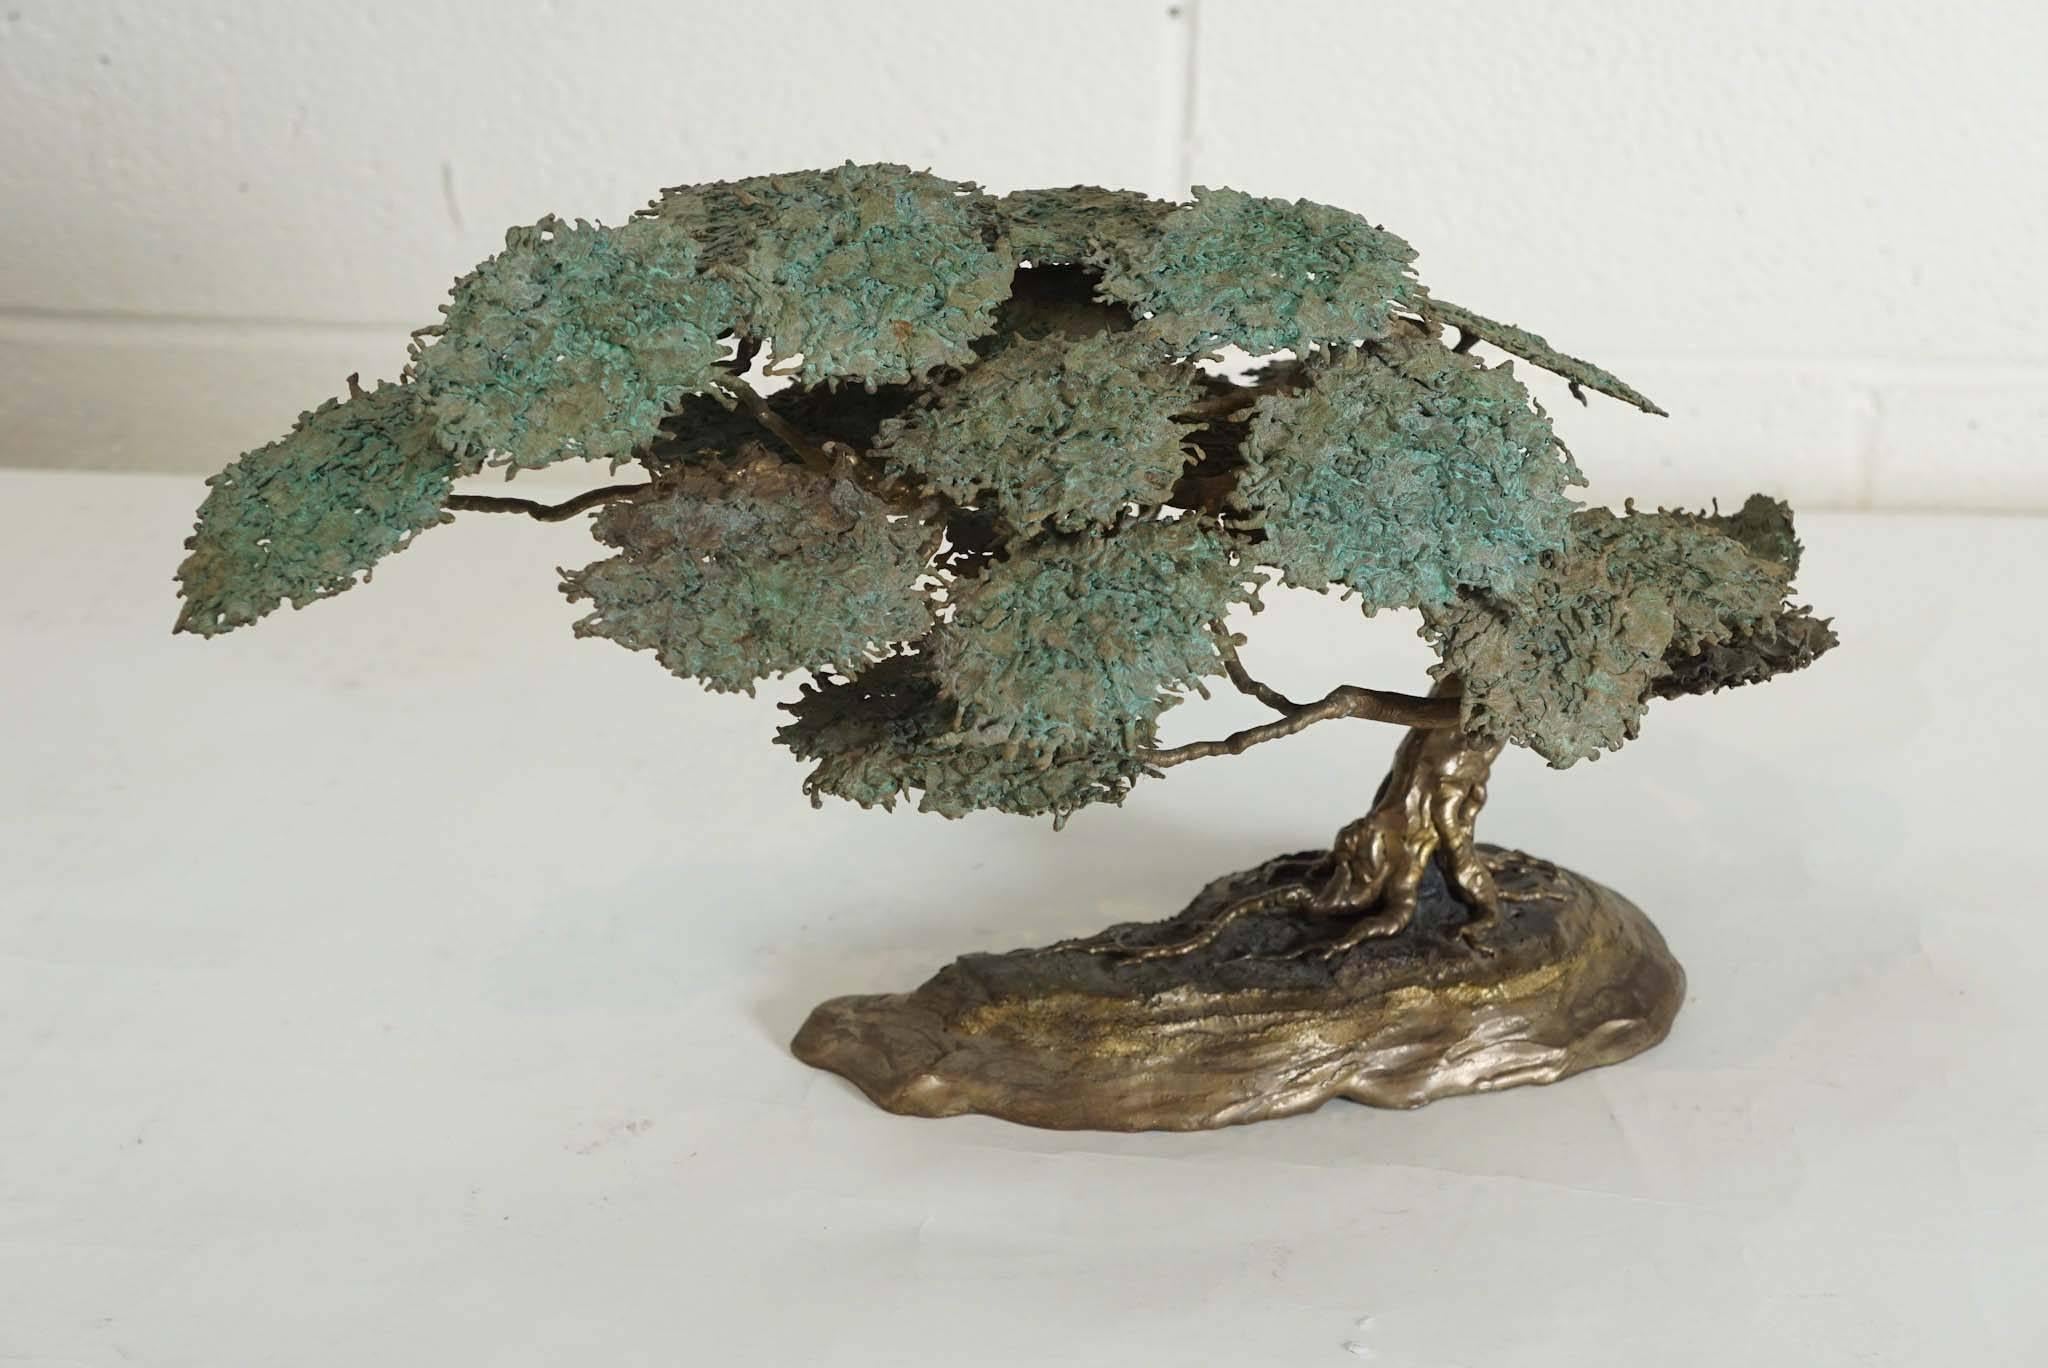 Here is an amazing Serengeti tree in a Brutalist style.
The small scale of the sculpture also appears to look like a bonsai.
The brass is in brass and the foliage has a textured oxidized patina.